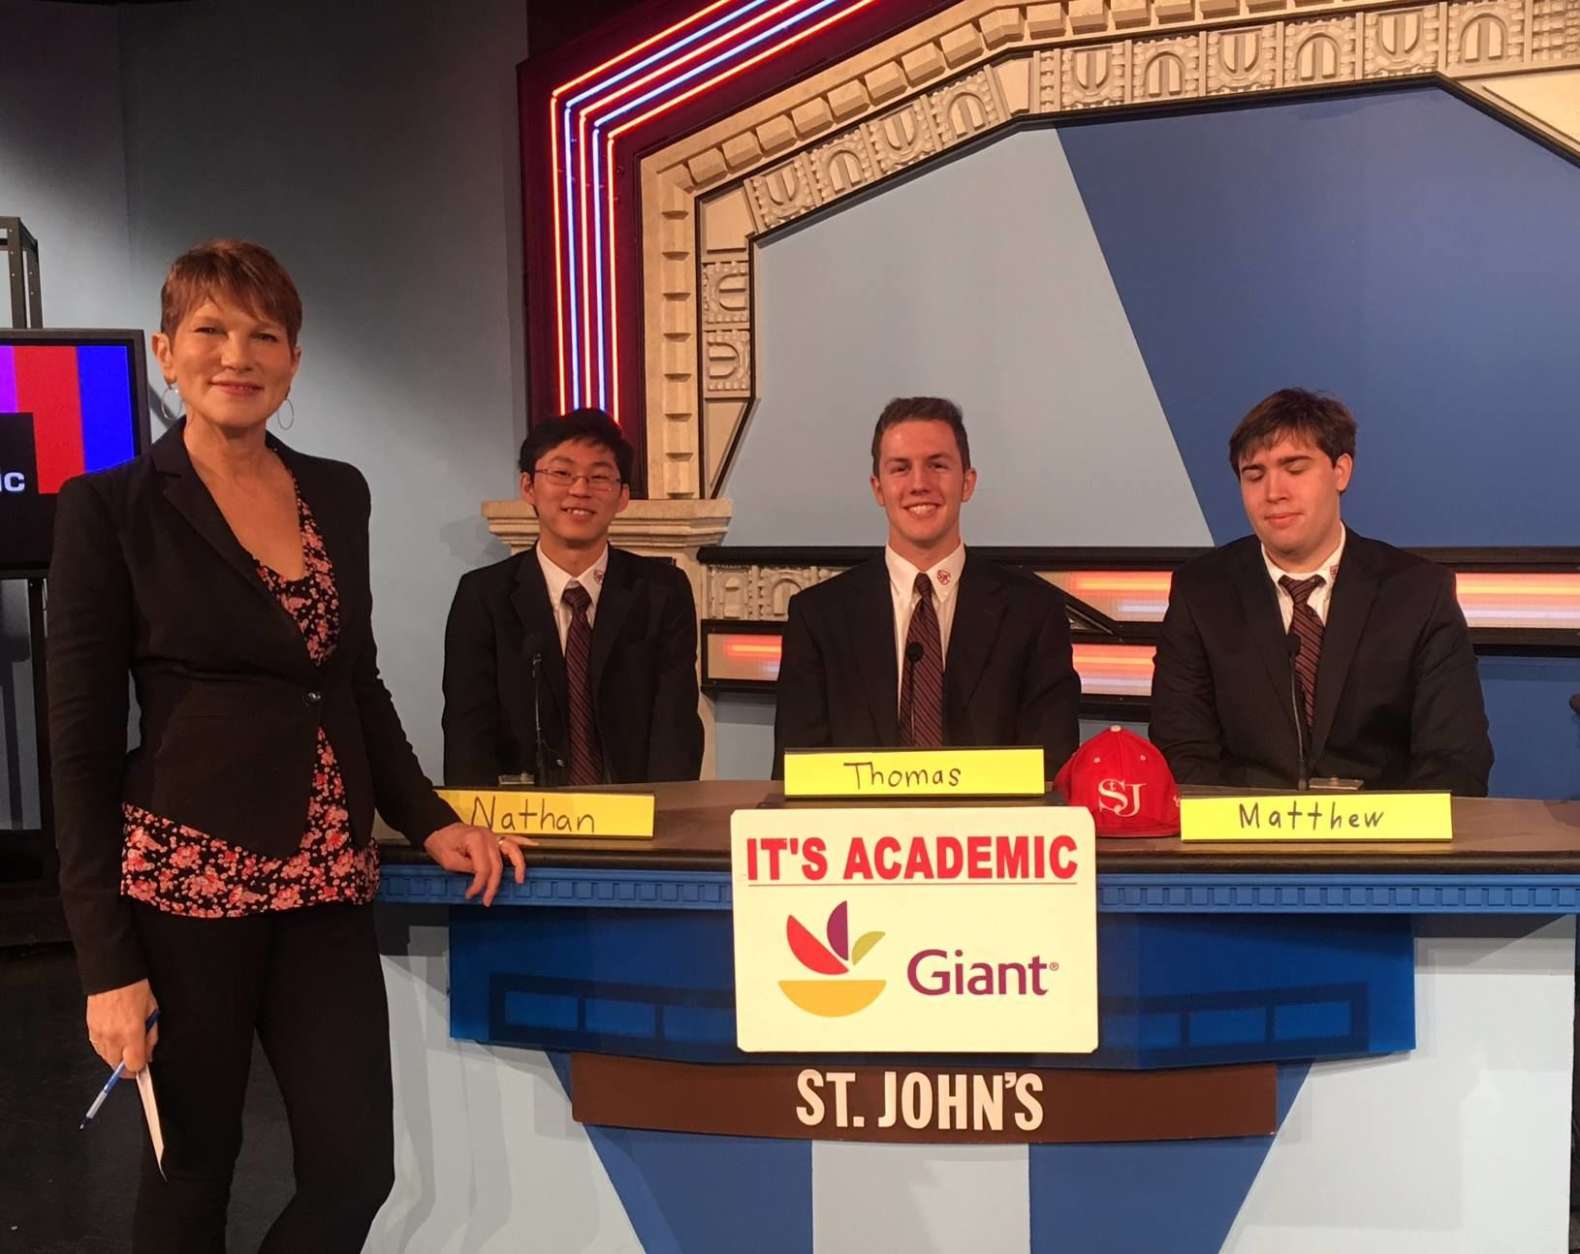 On "It's Academic," St. John's won against Banneker and Lake Braddock high schools. The show aired Feb. 24. (Courtesy Facebook/It's Academic)